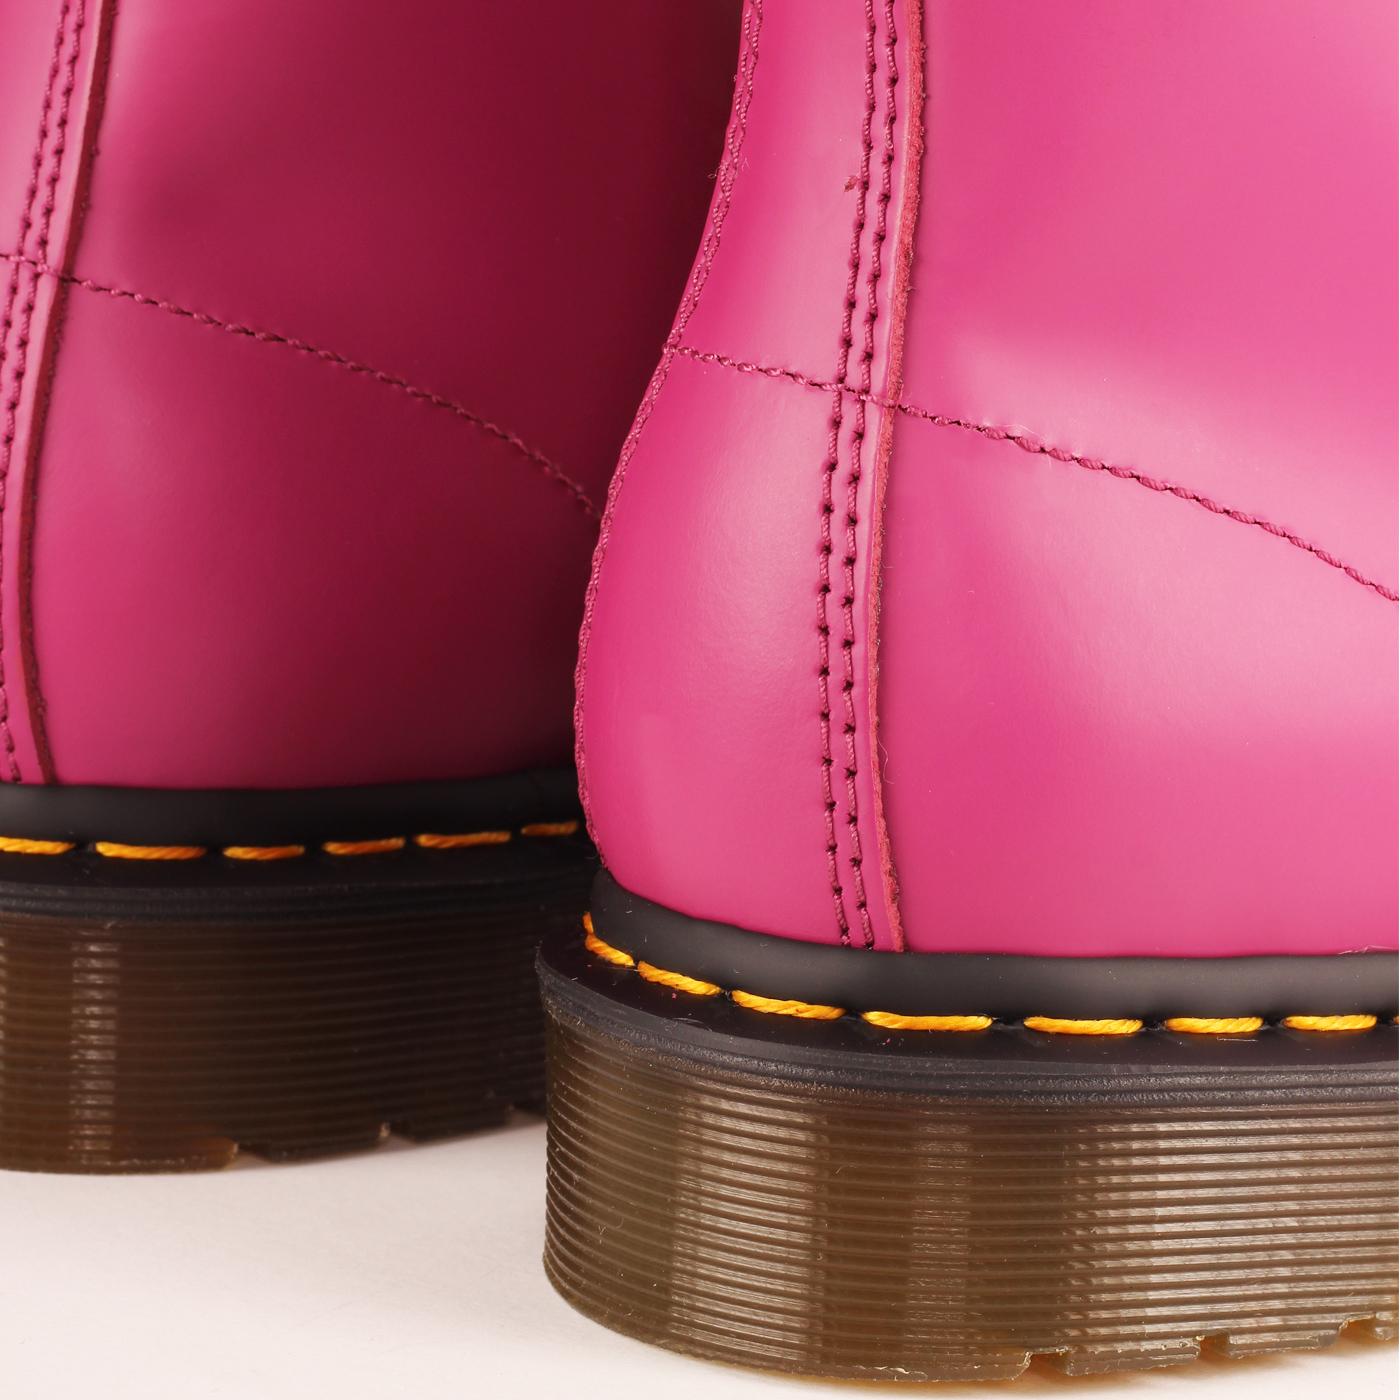 DR MARTENS 1460 Retro Mod Smooth Ankle Boots in Fuchsia